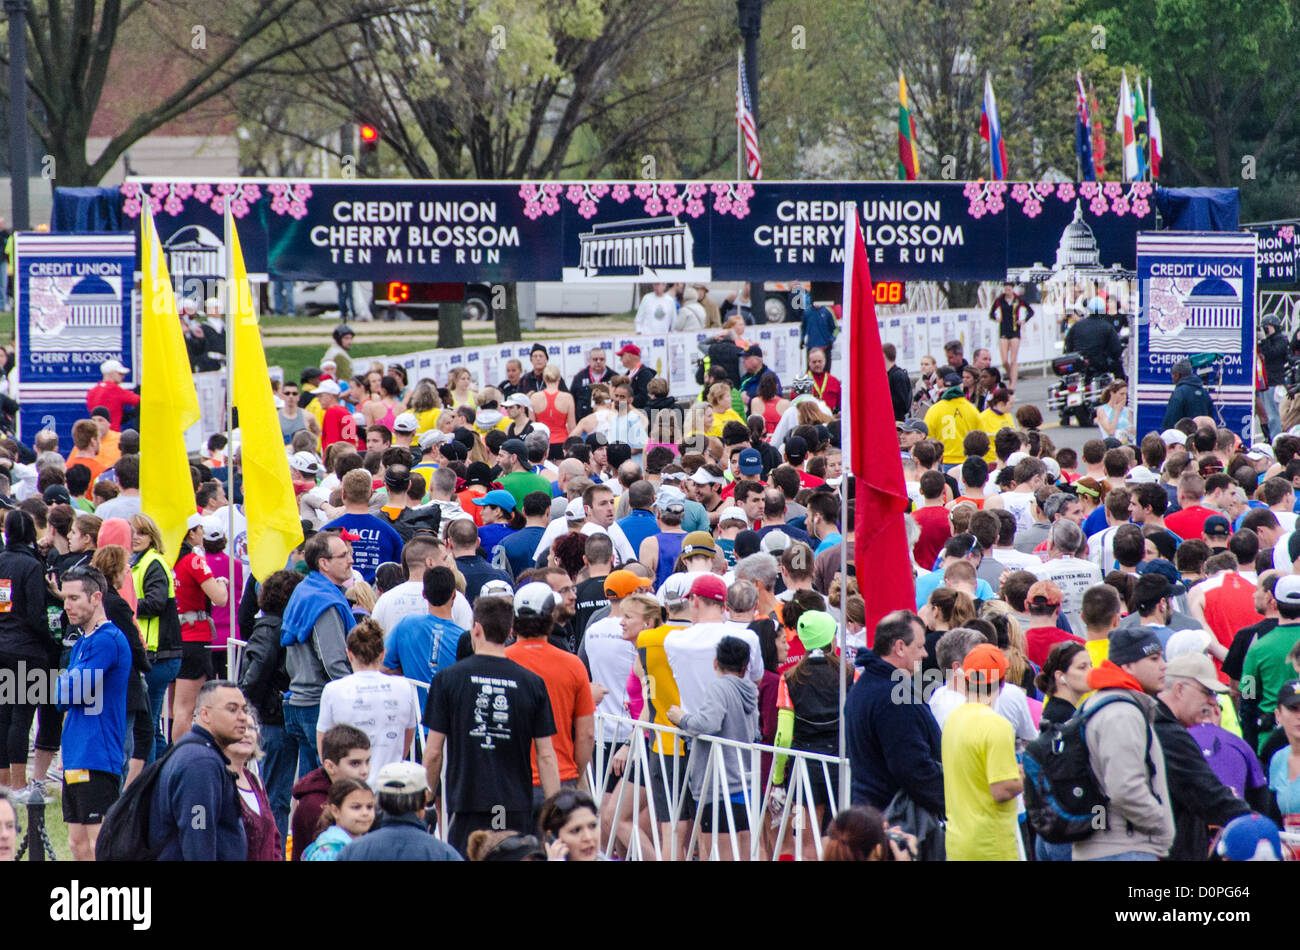 WASHINGTON DC, USA - The crowds of runners gather at the start line at the start of the 2012 Cherry Blossom 10-Miler, the 40th running of the race that is run every spring in Washington DC to coincide with the National Cherry Blossom Festival. The course starts near the Washington Monument, heads over Memorial Bridge and back, goes up under the Kennedy Center, around the Tidal Basin and past the Jefferson Memorial, and then does a loop around Hains Point back to the finish near the Washington Monument. Stock Photo